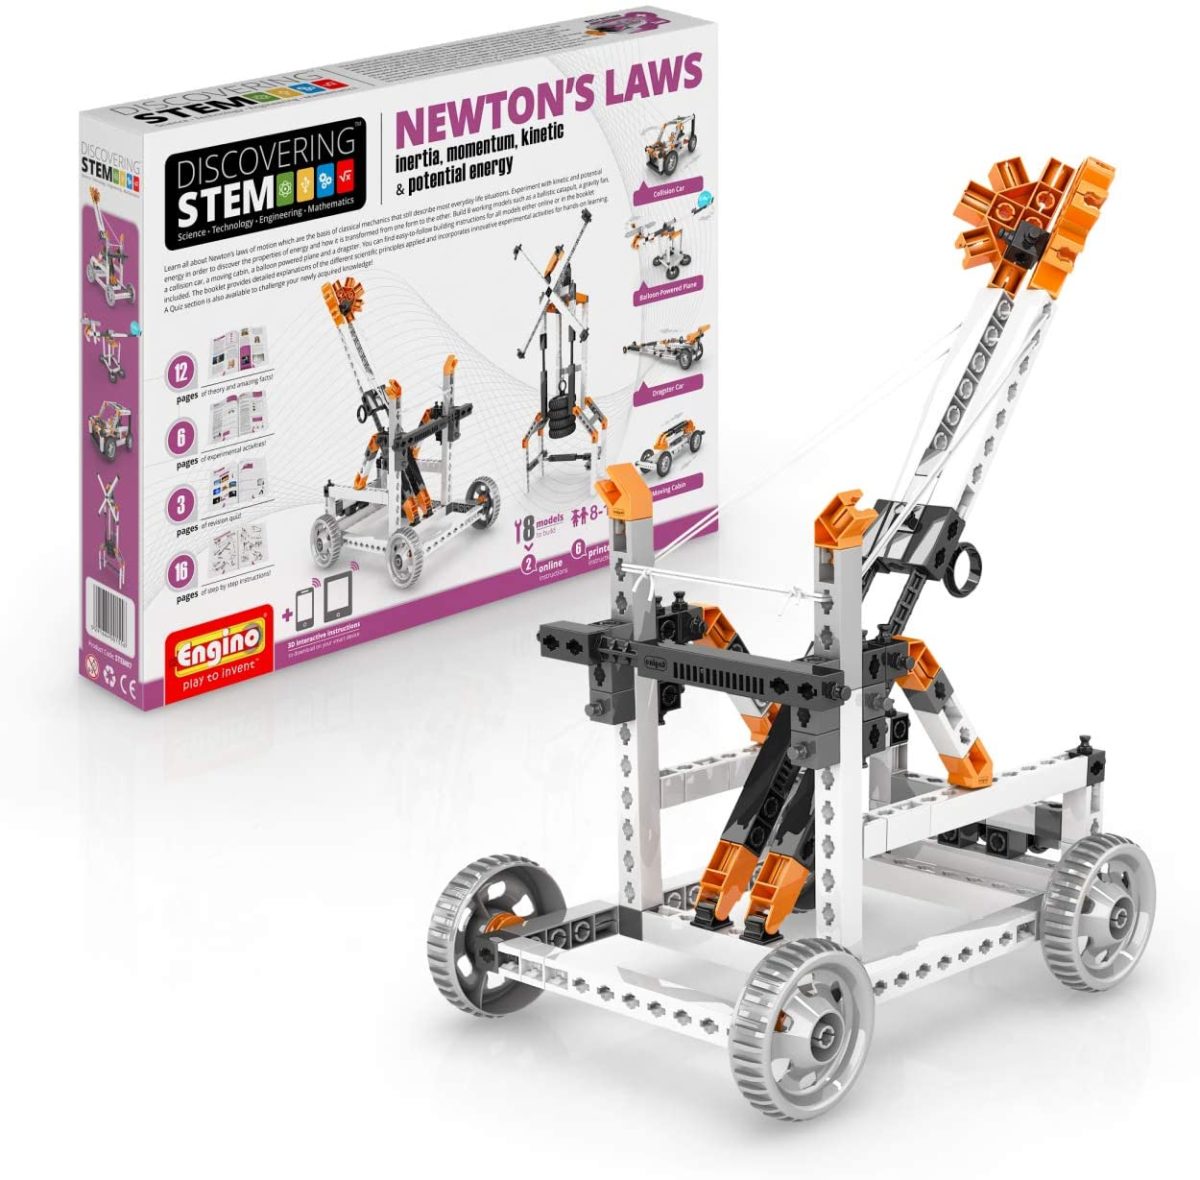 Engino Discovering STEM Newton’s Laws Construction Kit - Top Toys and Gifts for Ten Year Old Boys 1